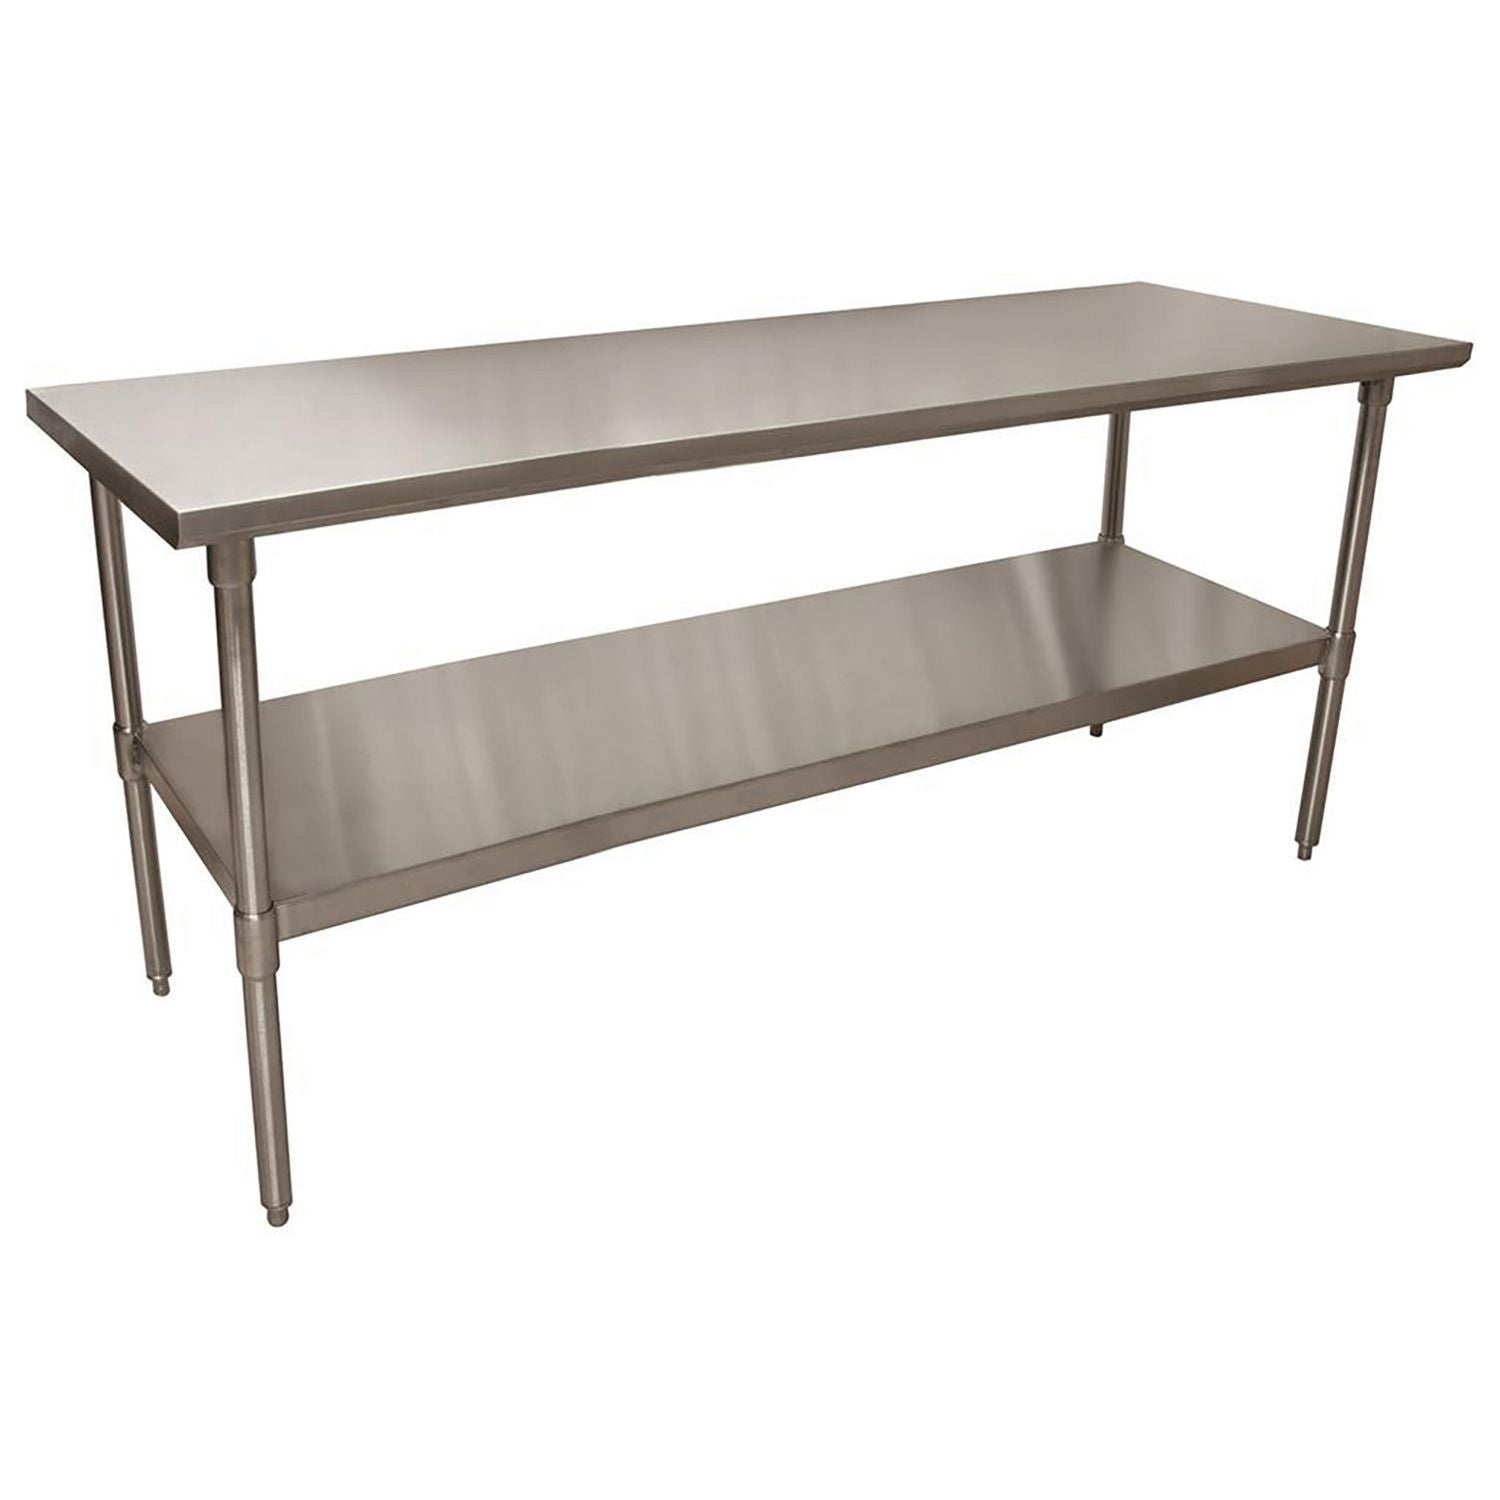 stainless-steel-flat-top-work-tables-72w-x-30d-x-36h-silver-2-pallet-ships-in-4-6-business-days_bke2vt7230 - 2